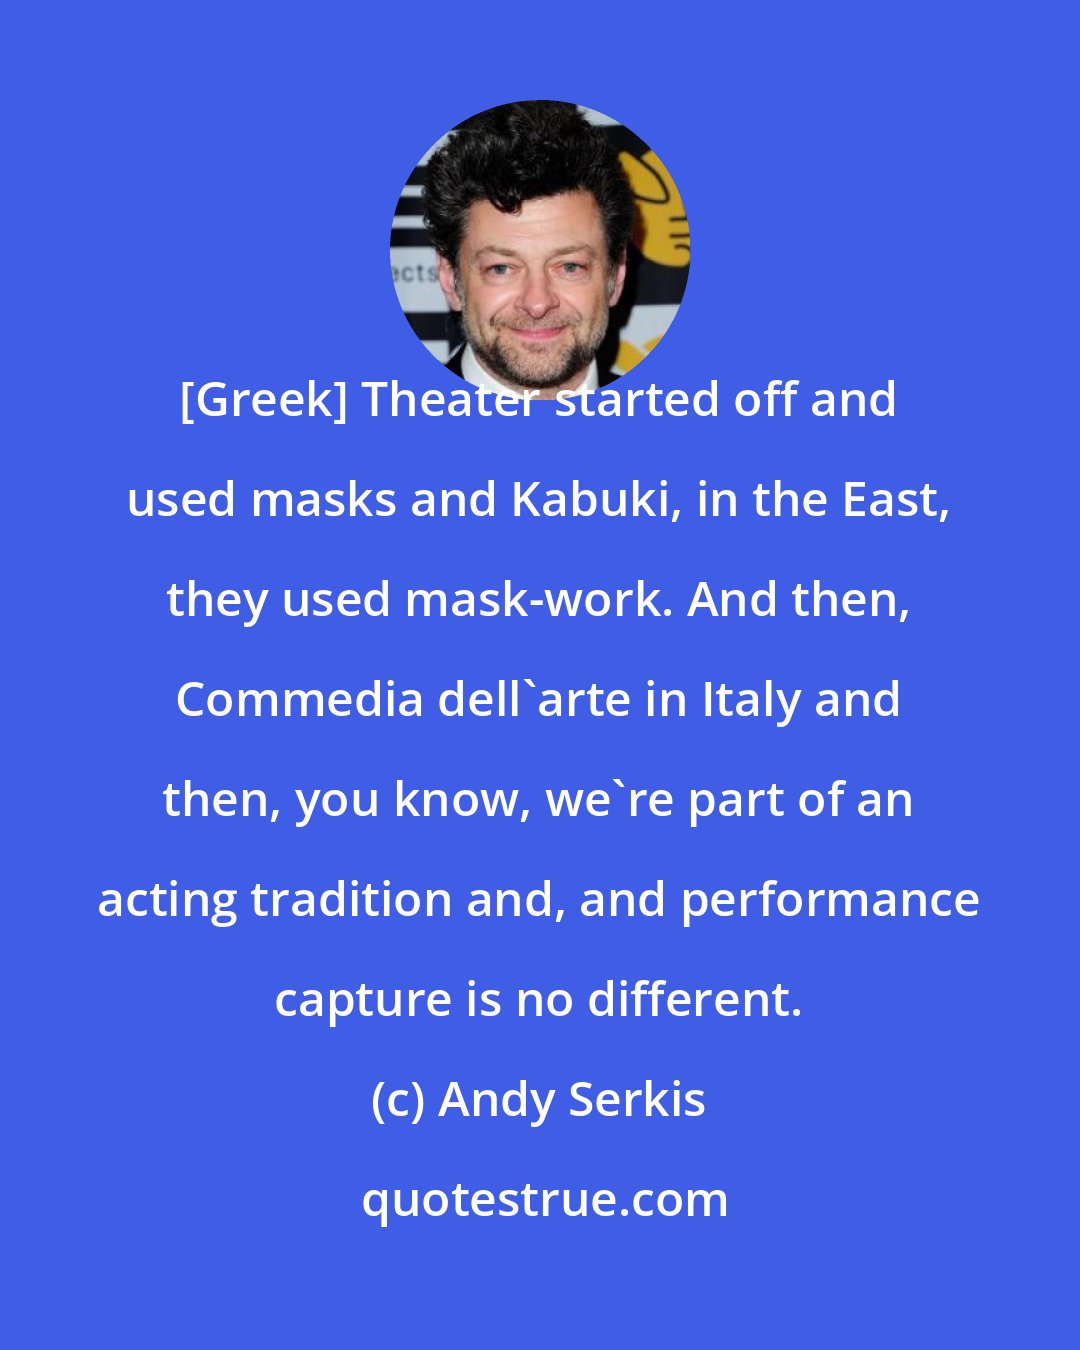 Andy Serkis: [Greek] Theater started off and used masks and Kabuki, in the East, they used mask-work. And then, Commedia dell'arte in Italy and then, you know, we're part of an acting tradition and, and performance capture is no different.